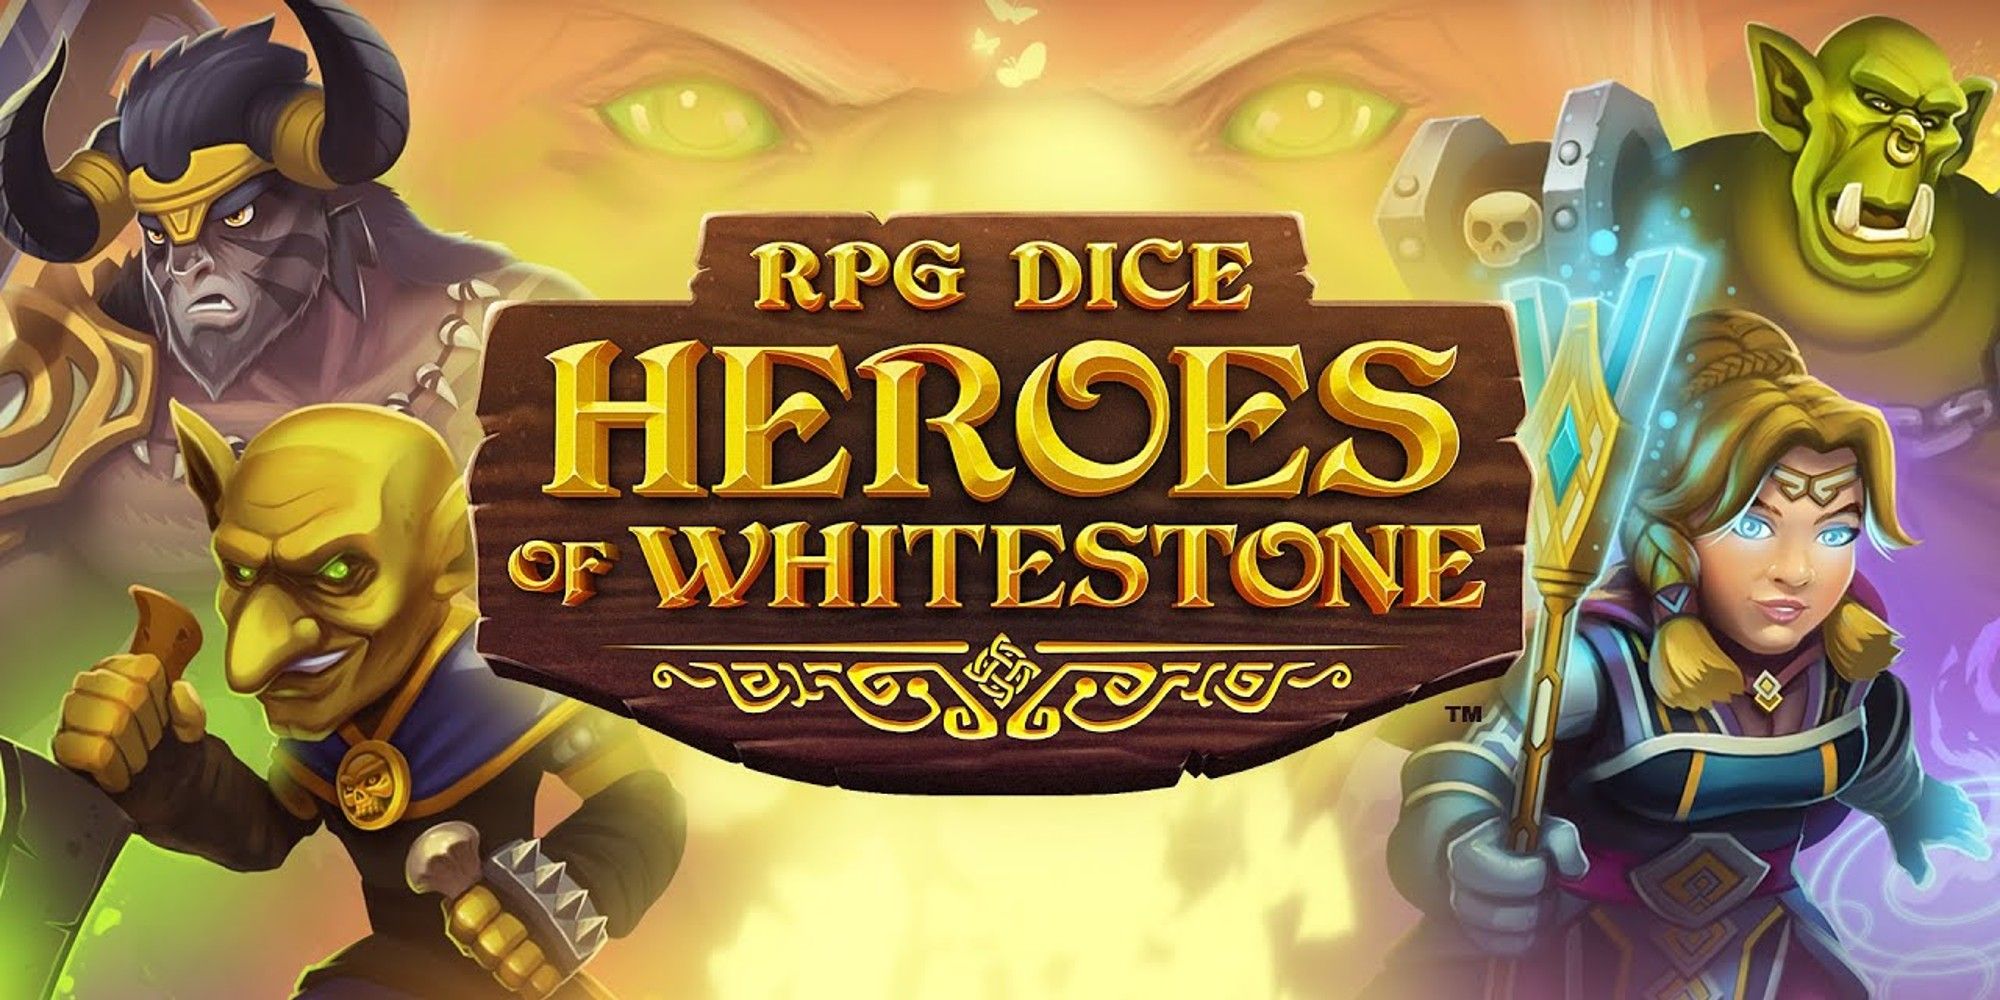 RPG Dice: Heroes of Whitestone cover art with four characters and the logo